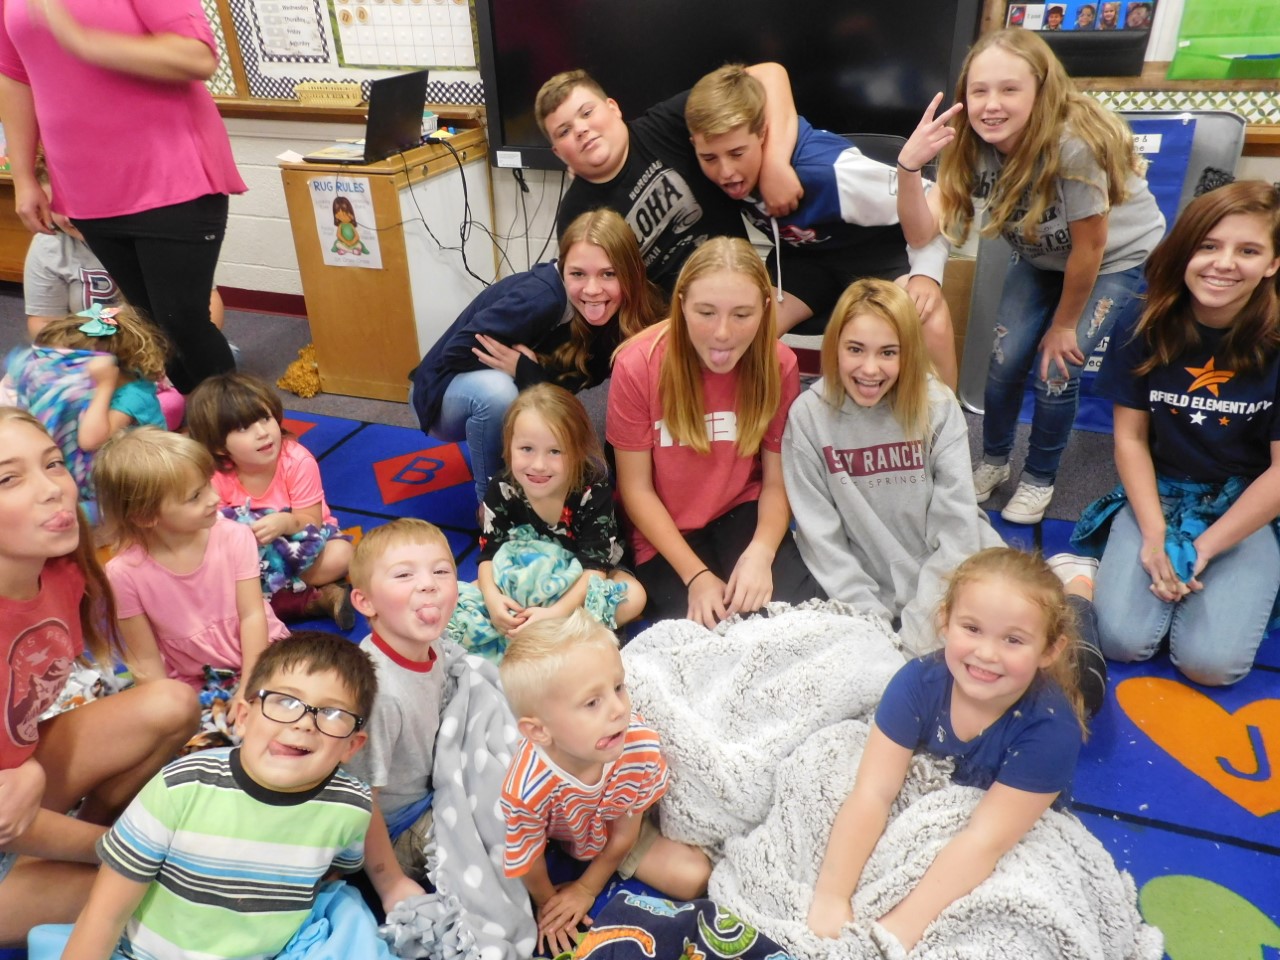 East student council members make blankets for PreK students